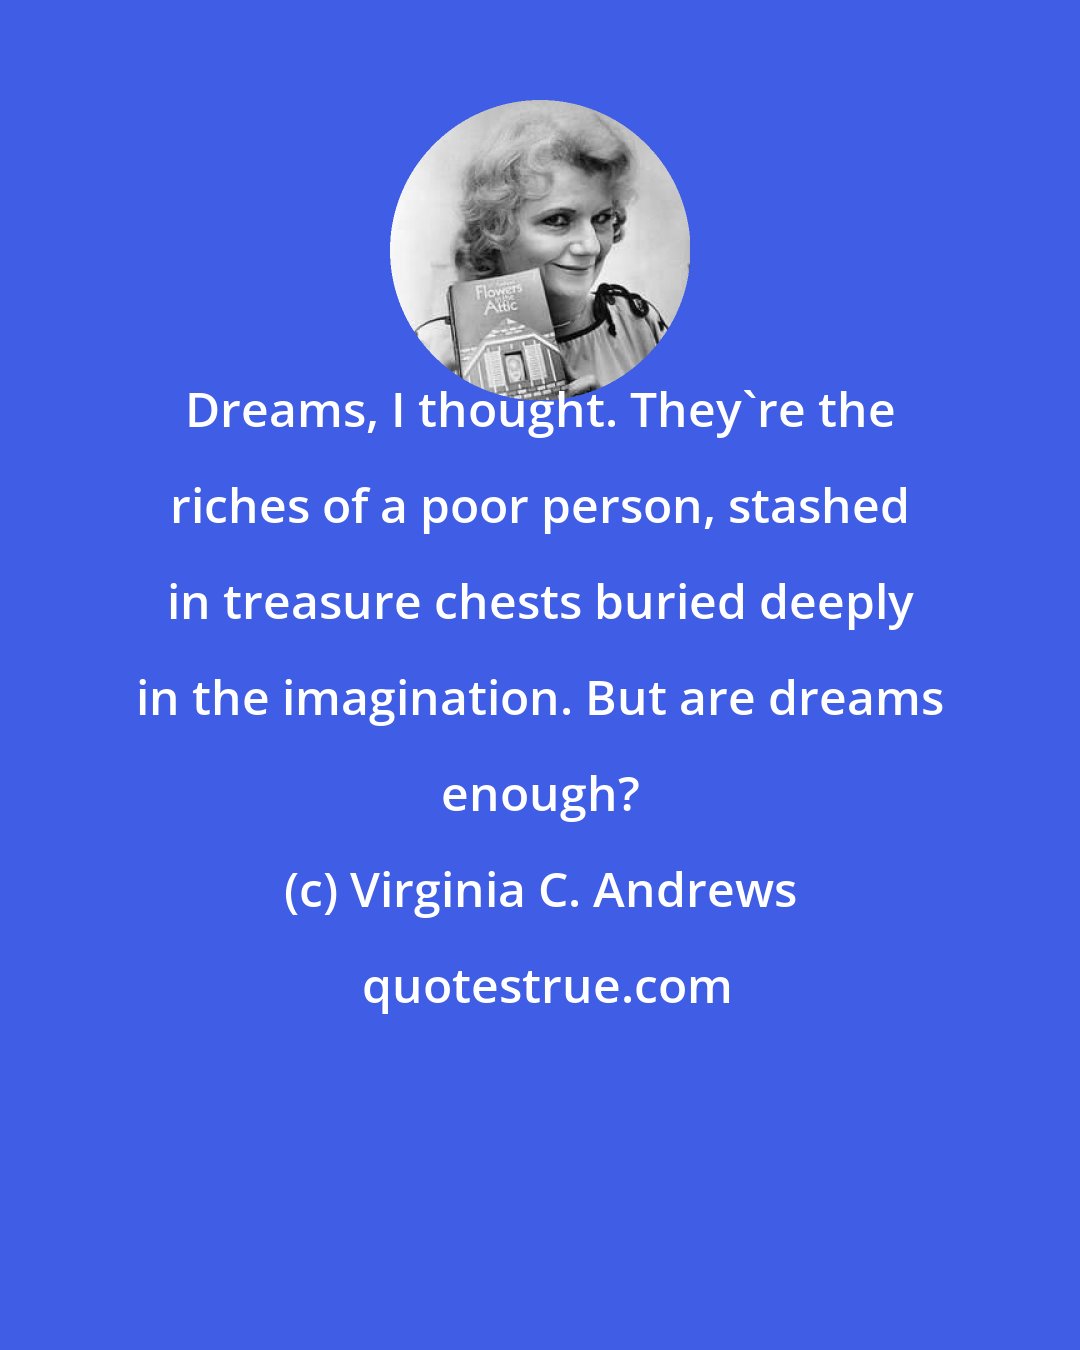 Virginia C. Andrews: Dreams, I thought. They're the riches of a poor person, stashed in treasure chests buried deeply in the imagination. But are dreams enough?